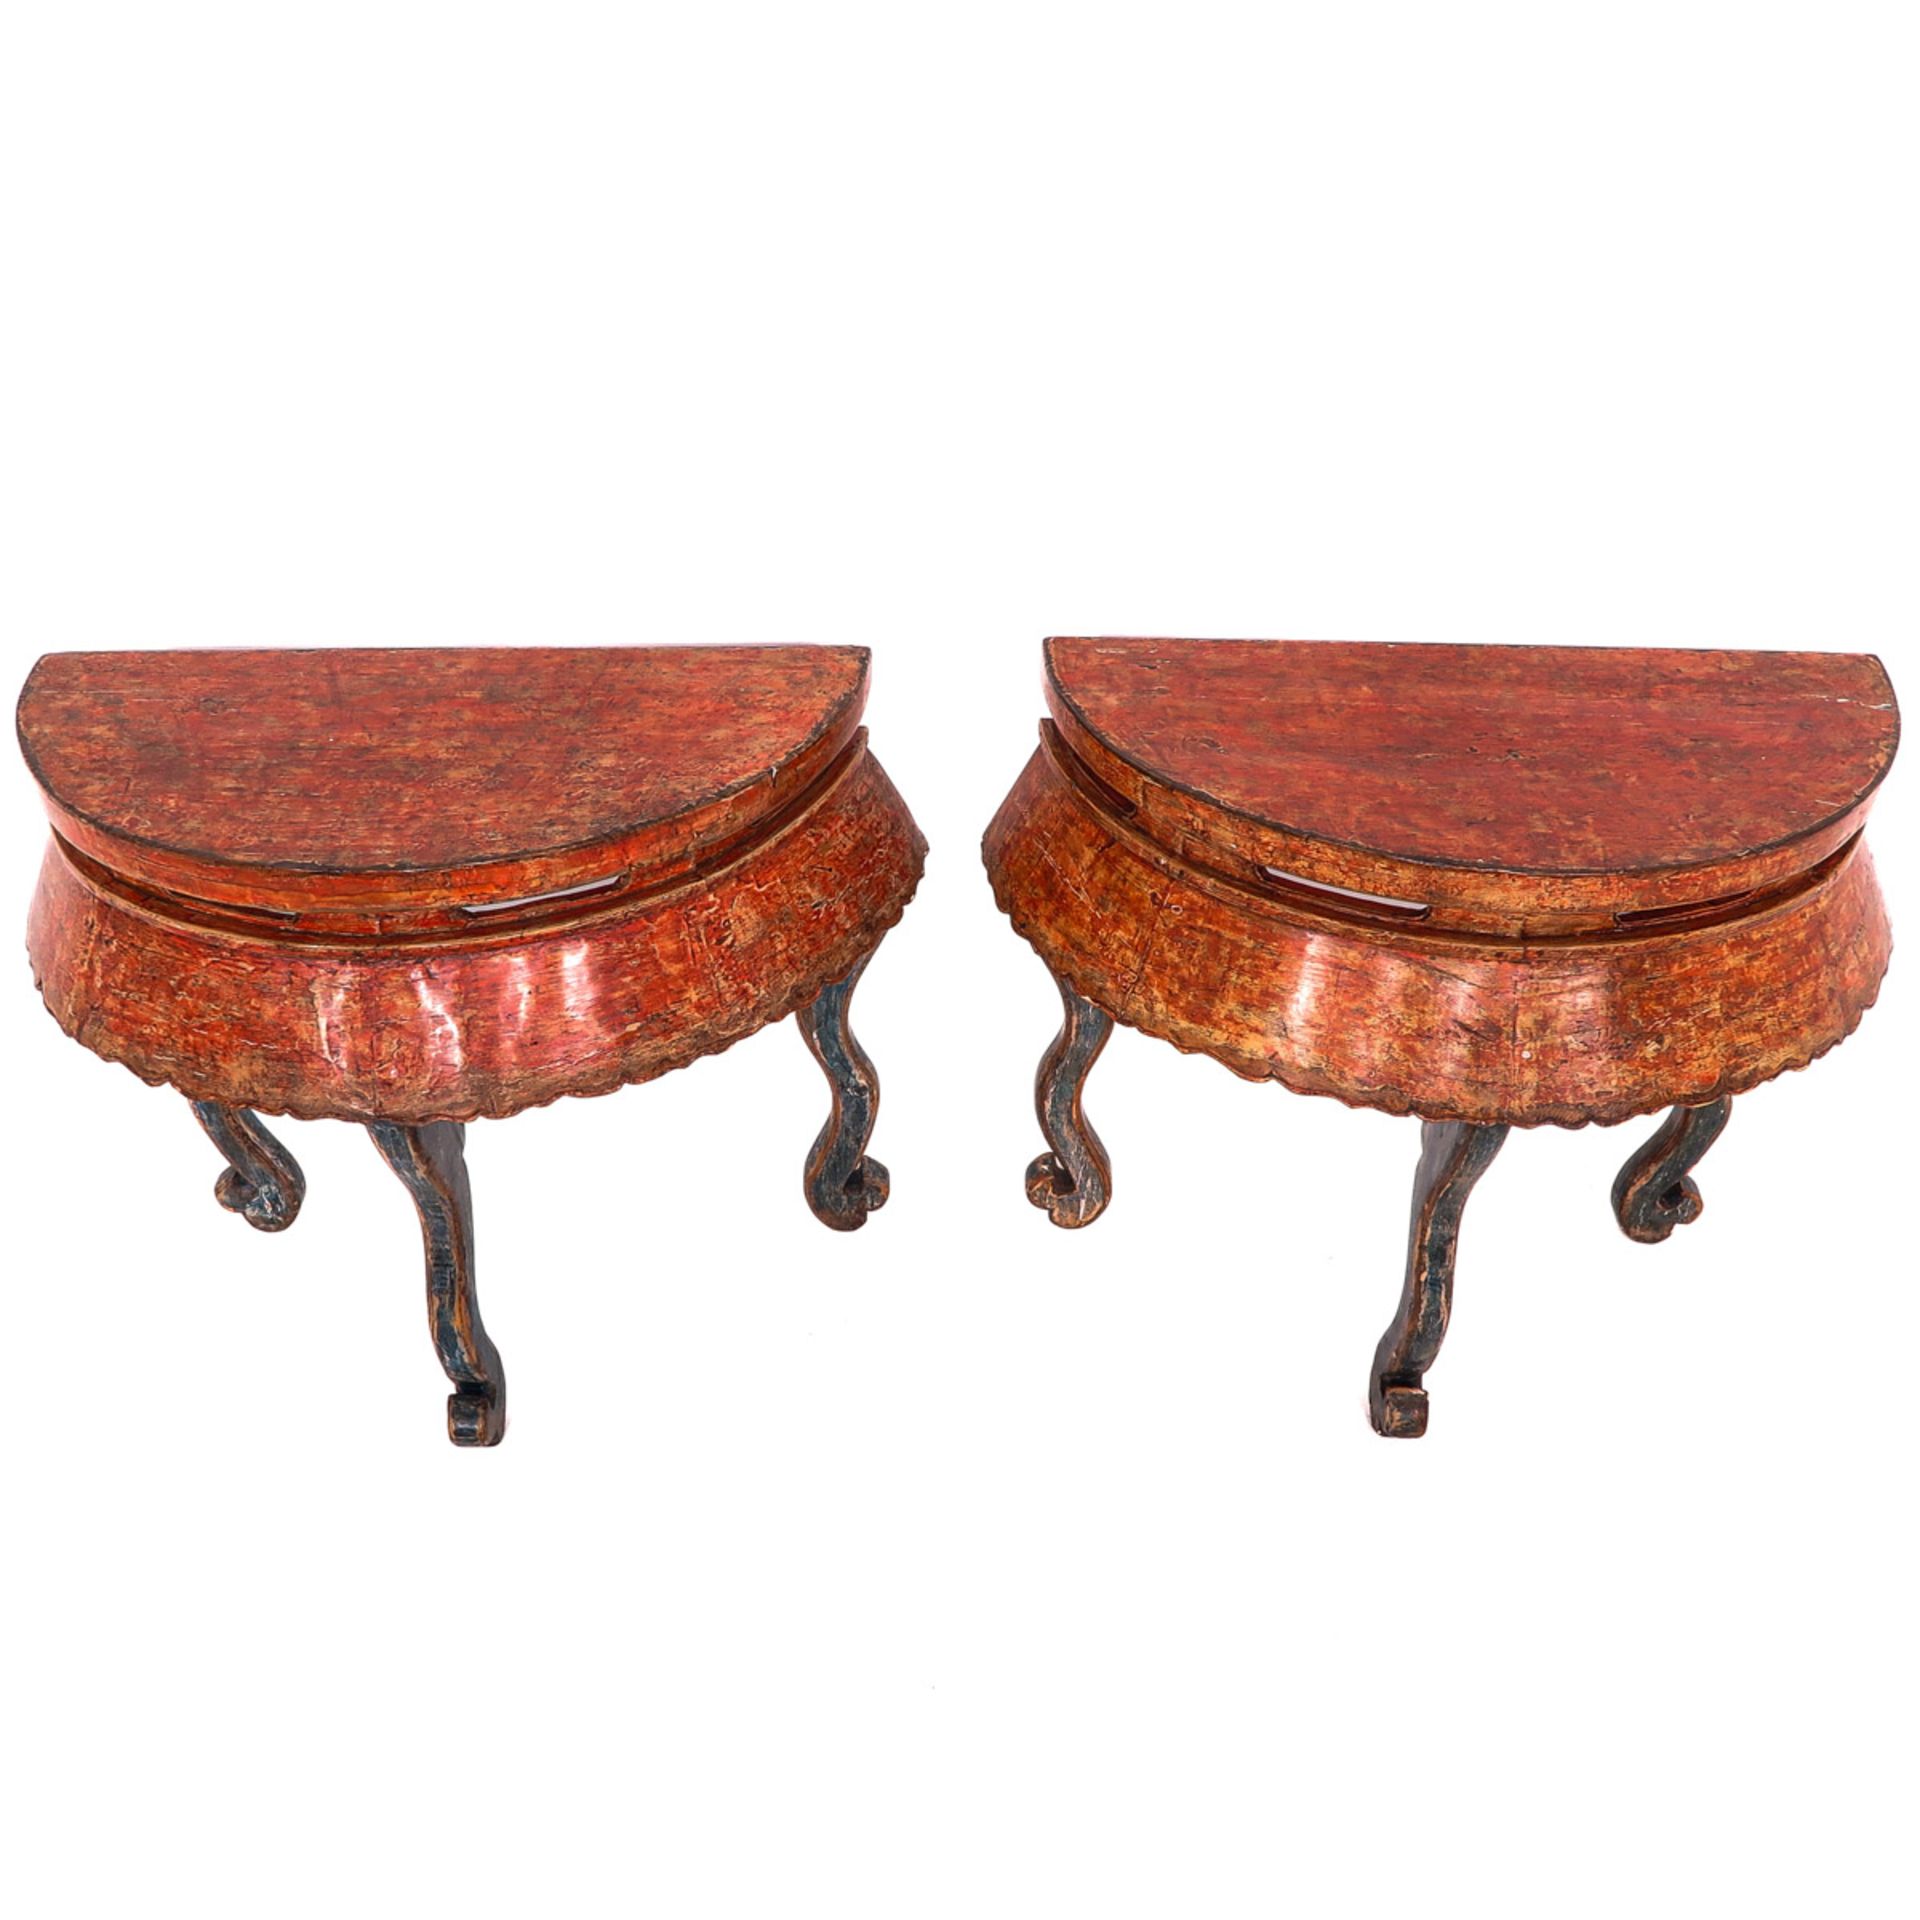 A Lot of 2 Demi Lune Console Tables - Image 4 of 8